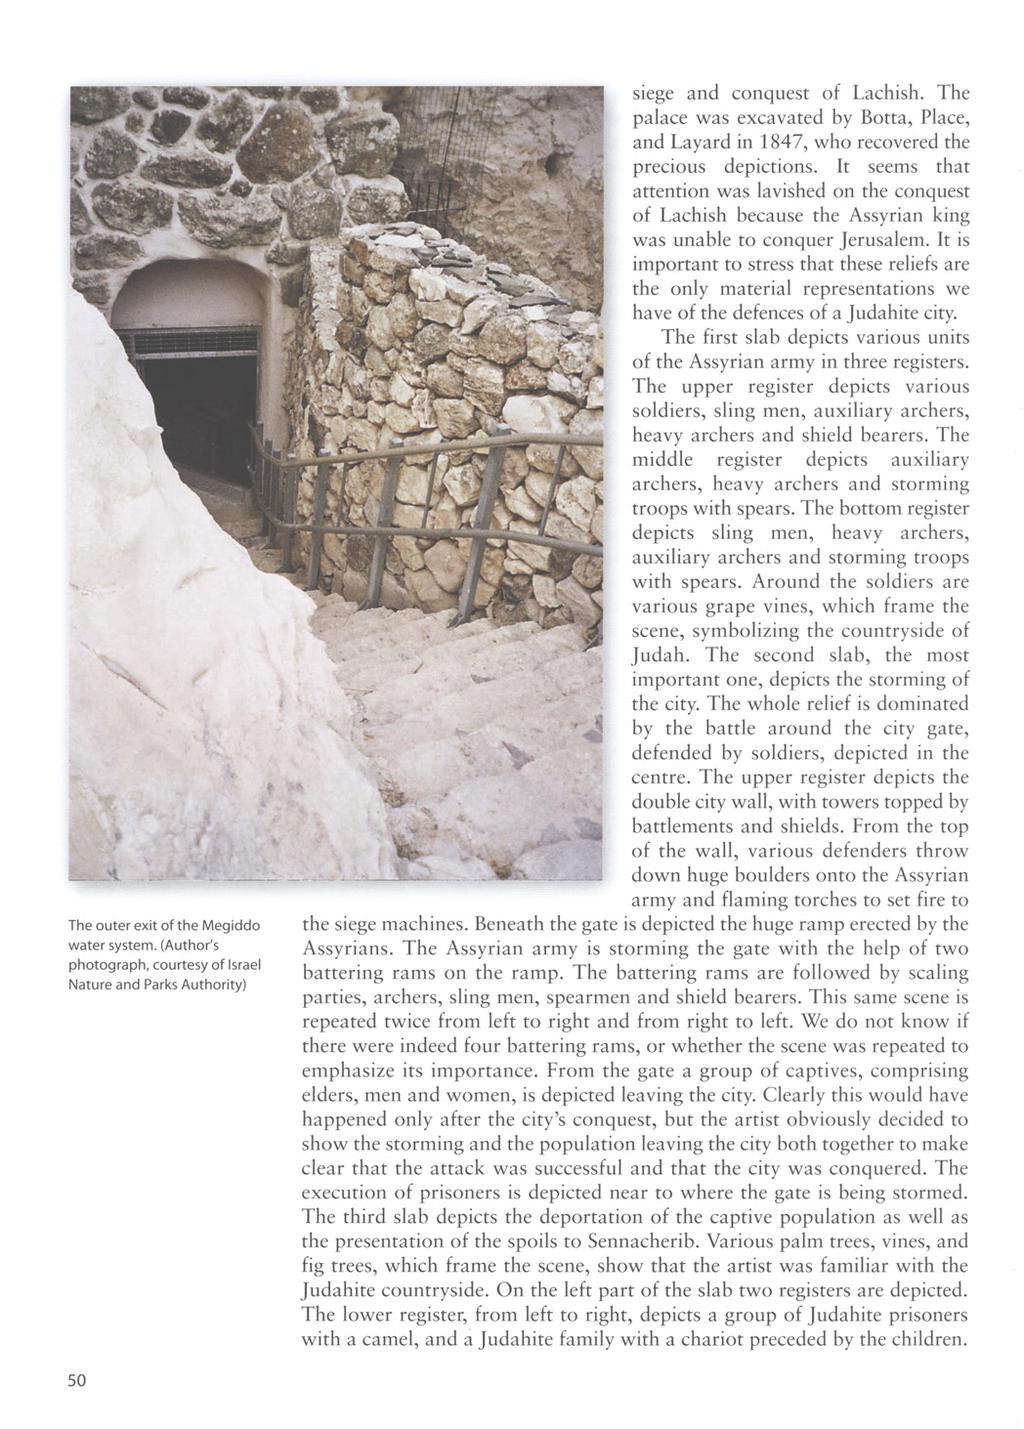 The outer exit of the Megiddo water system. (Author's photograph, courtesy of Israel Nature and Parks Authority) siege and conquest of Lachish.